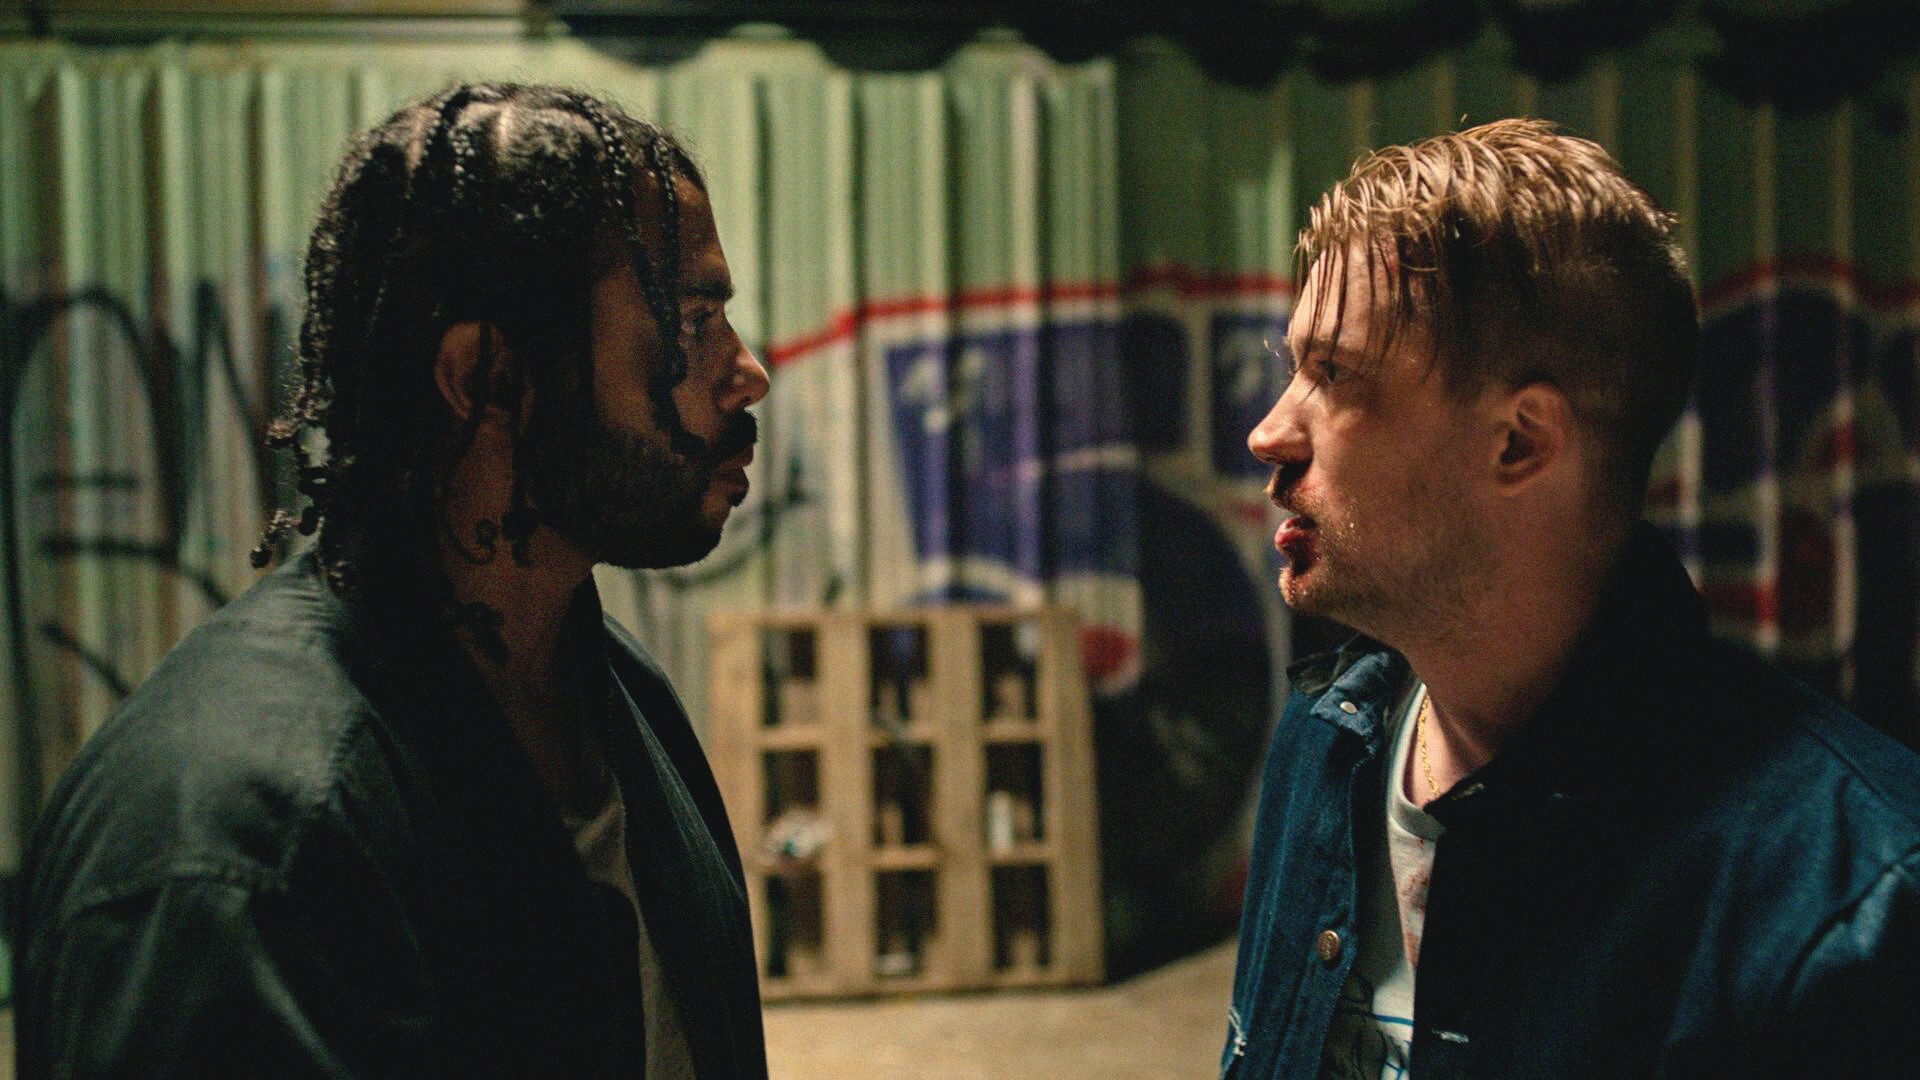  Daveed Diggs as &quot;Collin&quot; and Rafael Casal as &quot;Miles&quot; in BLINDSPOTTING. Photo courtesy of Lionsgate.